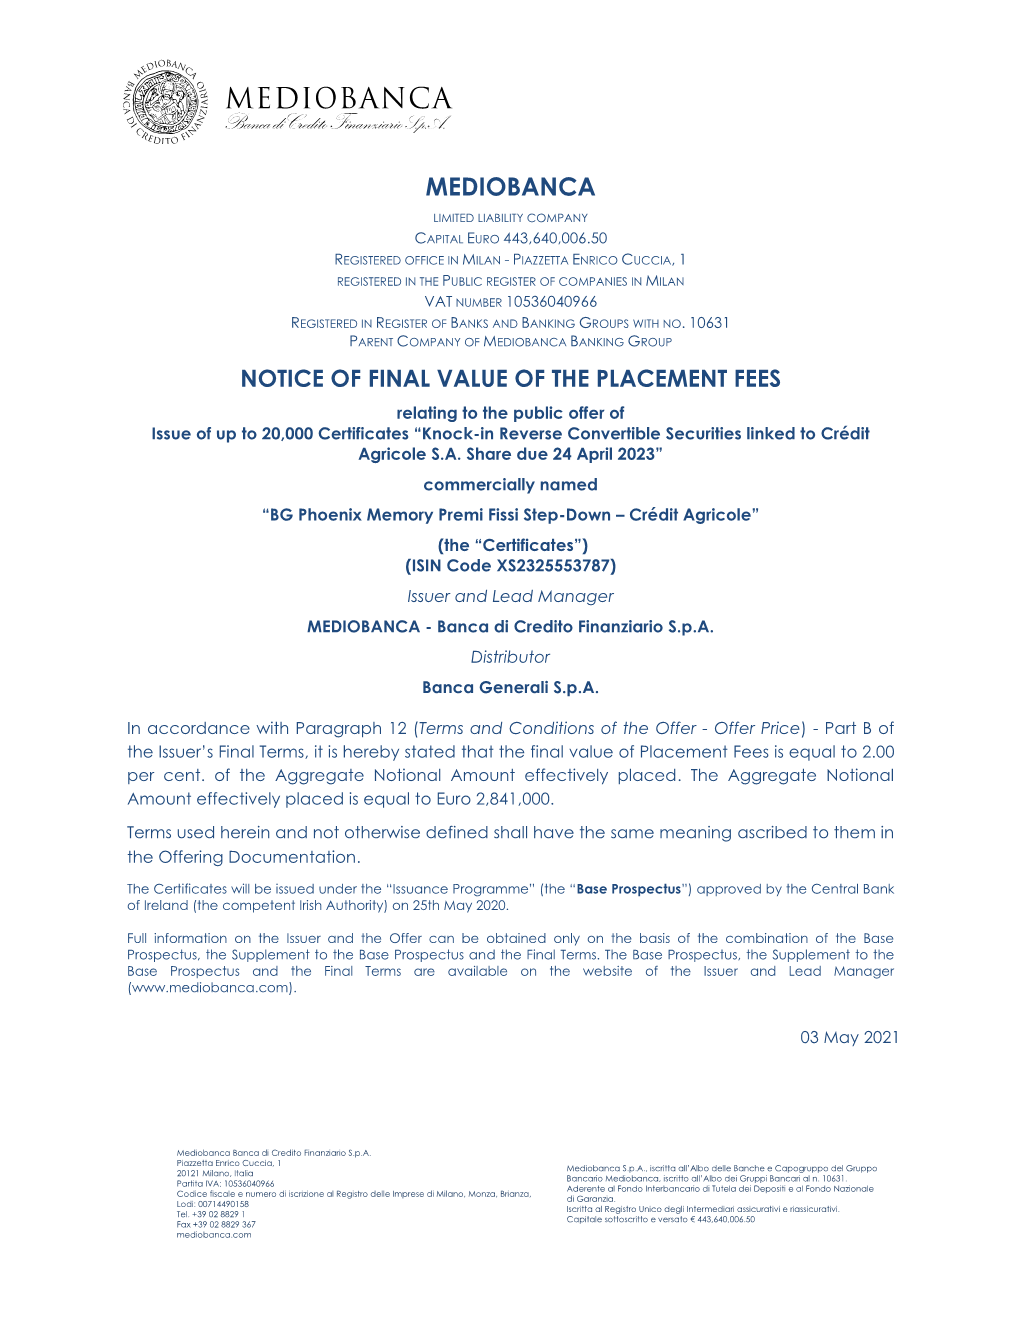 Notice of Final Value of the Placement Fees